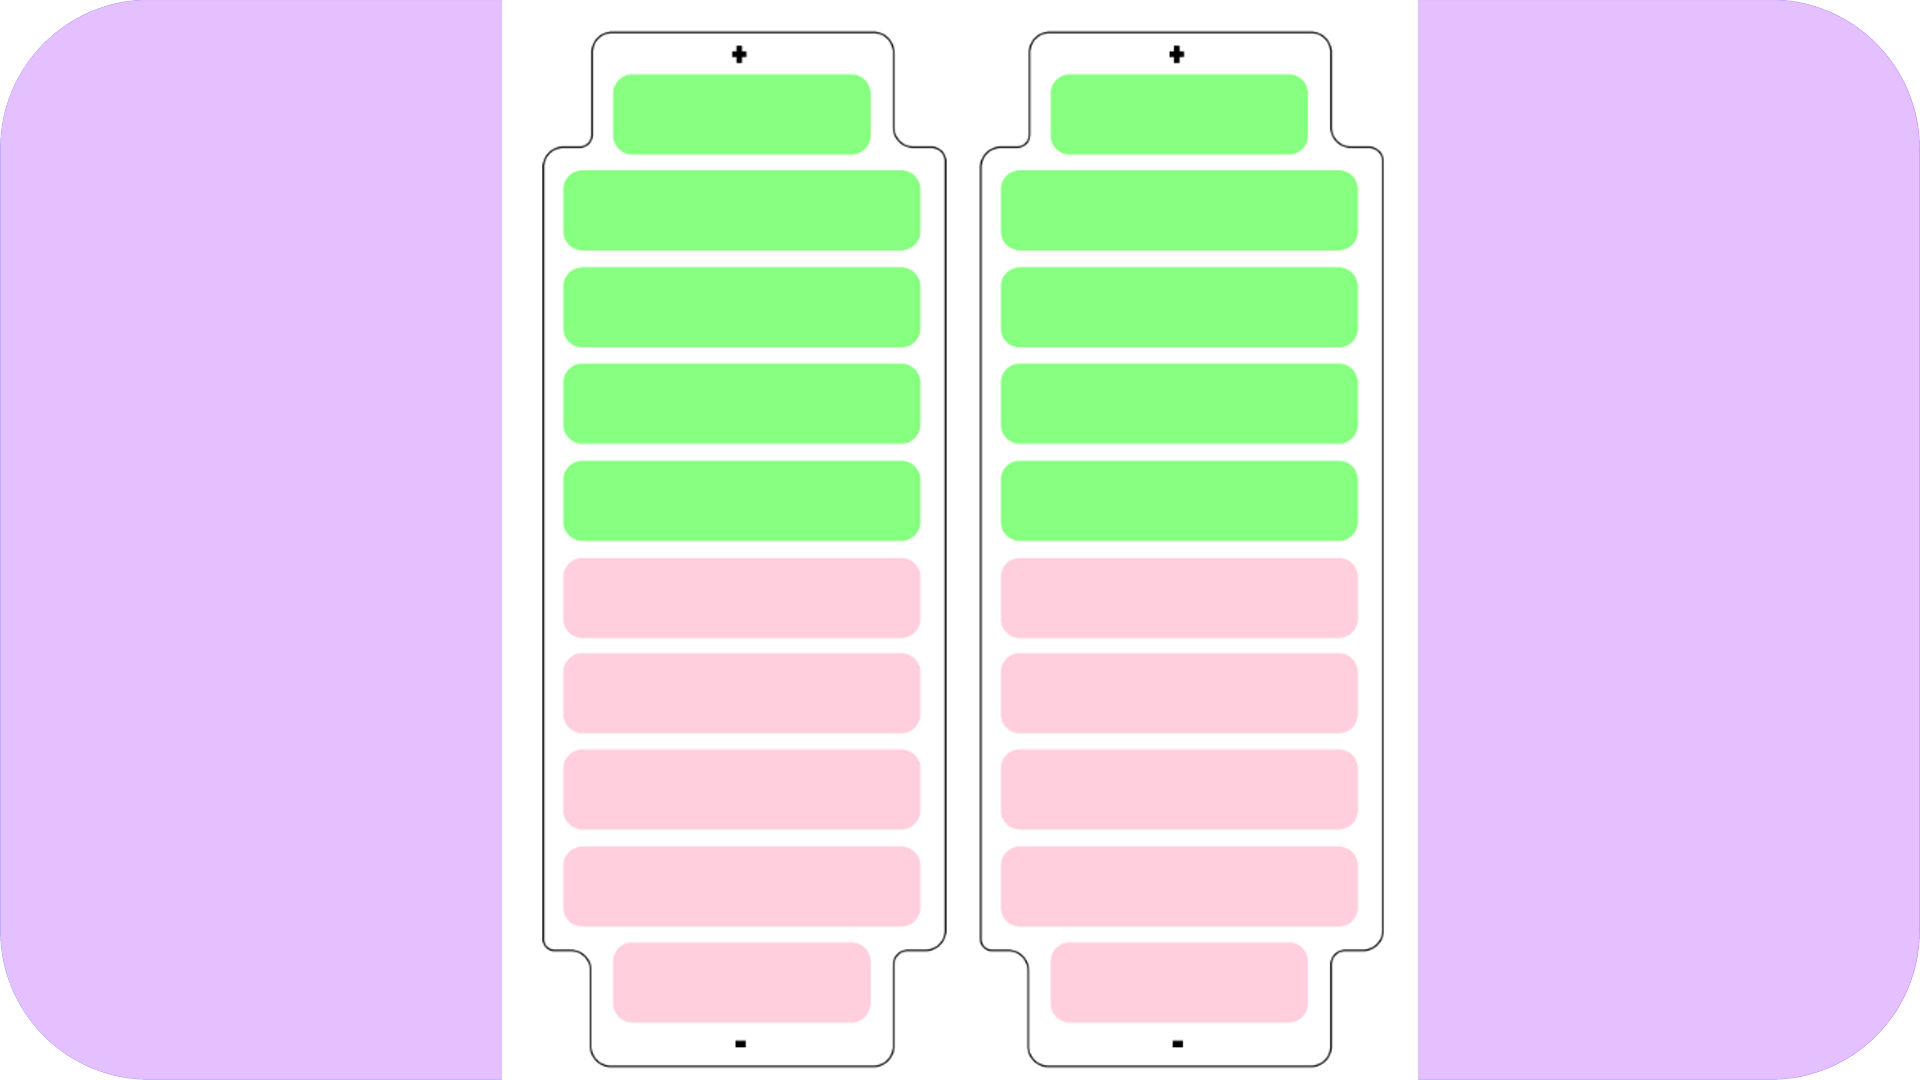 A preview of the mood battery resource showing two batteries with green rectangles ad red rectangles to write in your different moods.